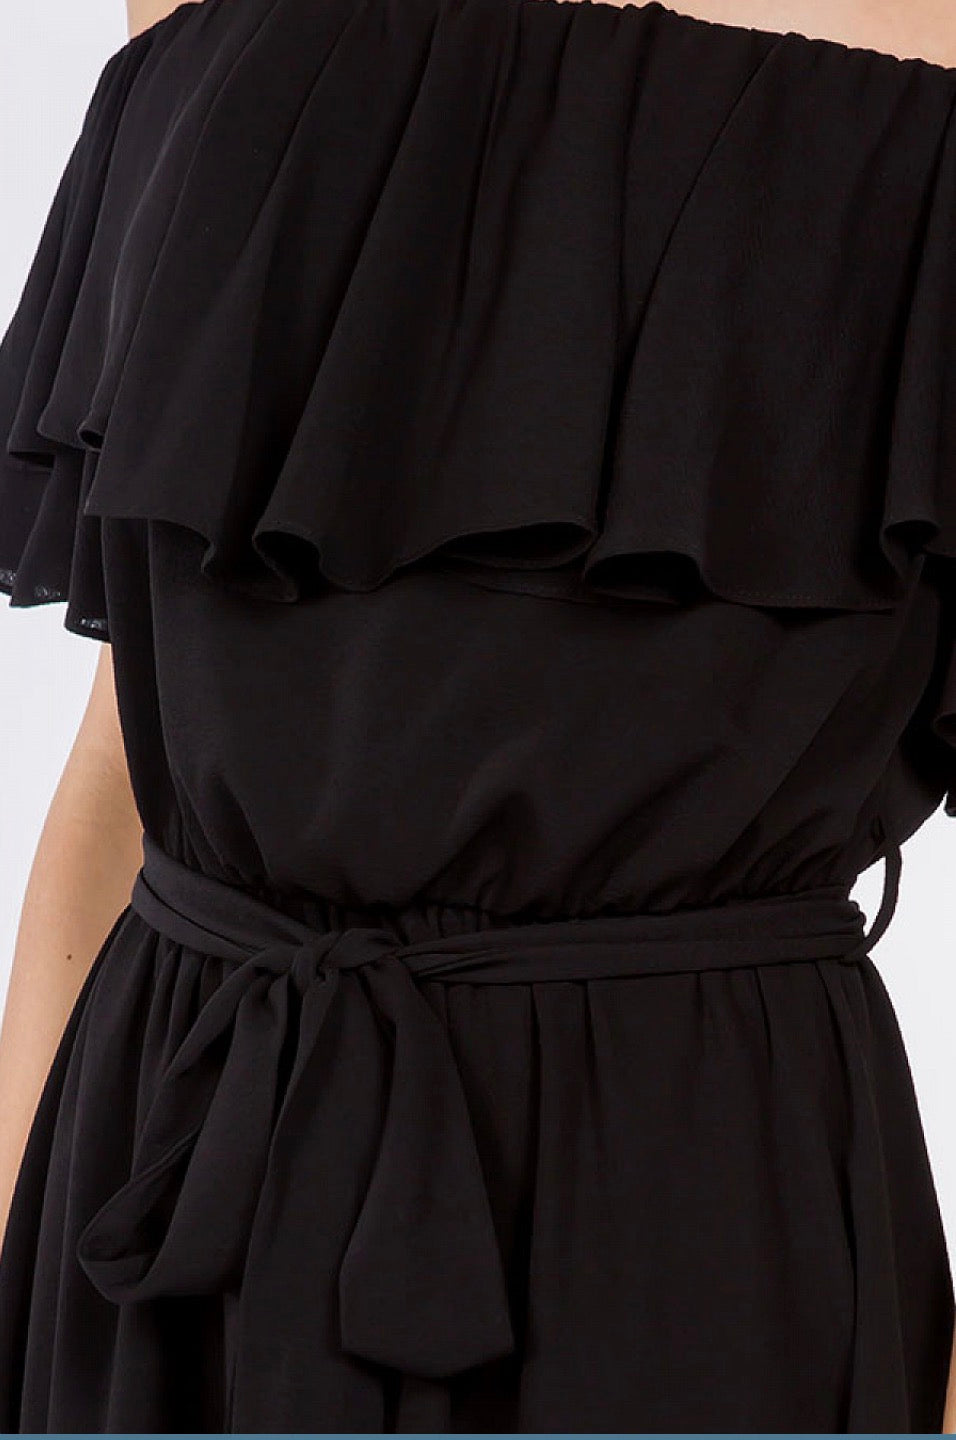 A woman wearing a black Off Shoulder Ruffle Dress with a tie around the waist from Spin USA.